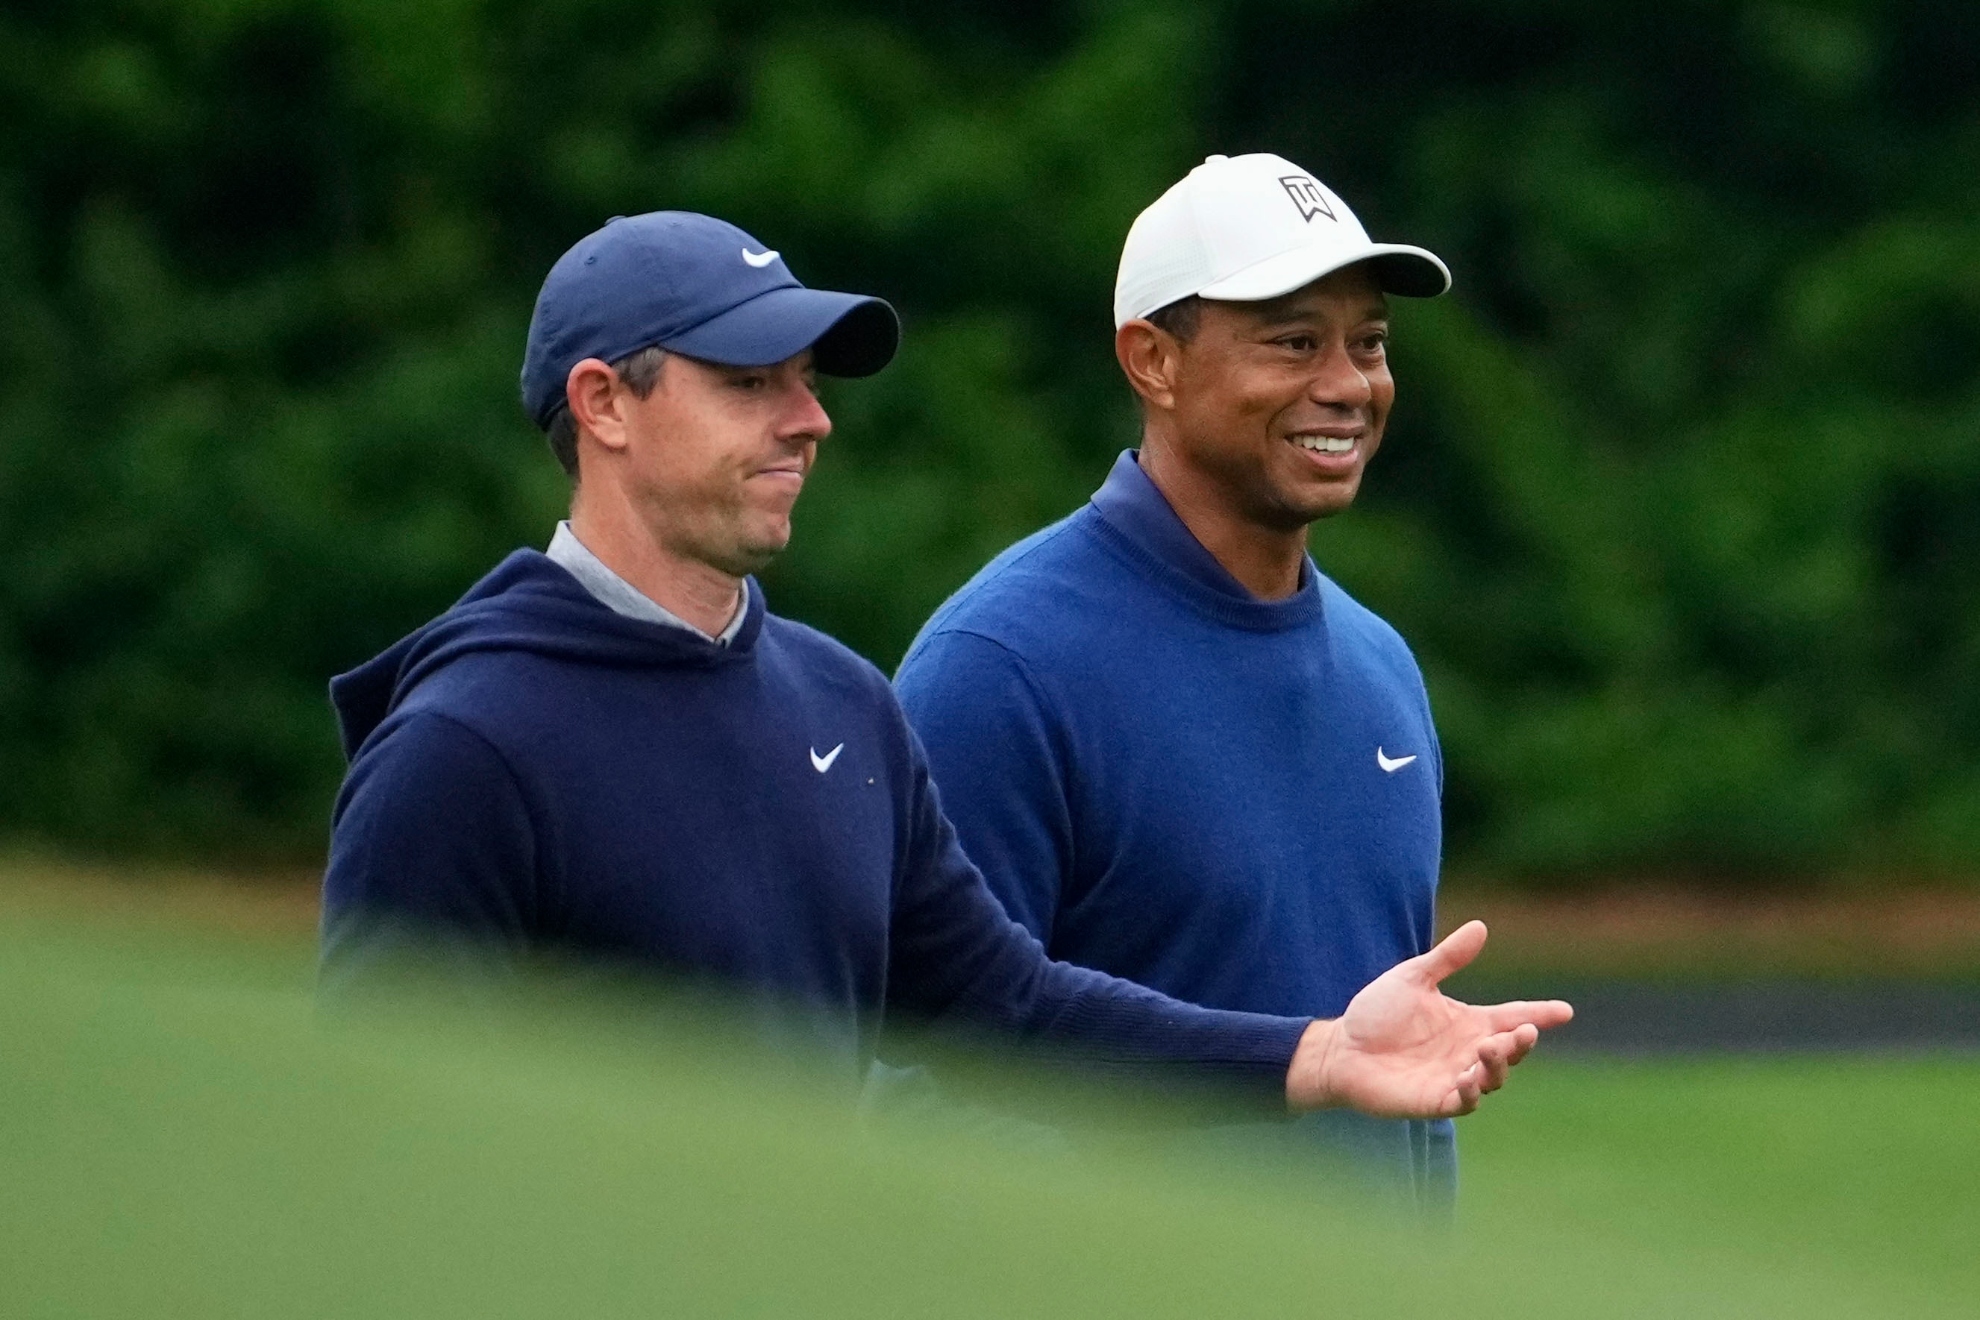 Rory McIlroy and Tiger Woods playing a game